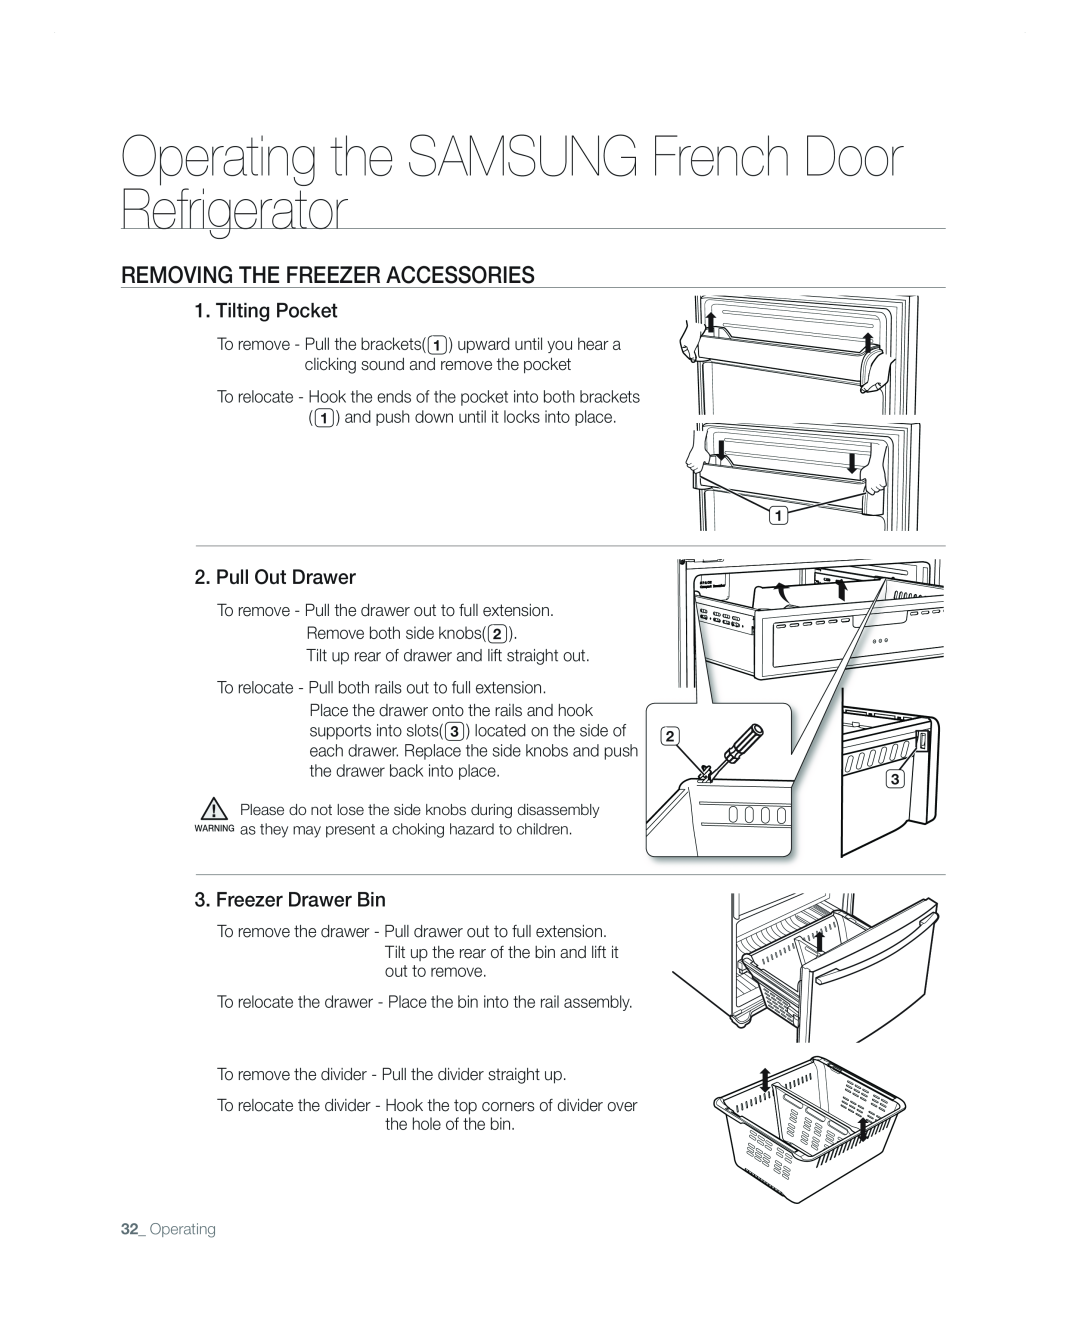 Samsung RF267AA user manual Removing The Freezer Accessories, Tilting Pocket, Pull Out Drawer, Freezer Drawer Bin 